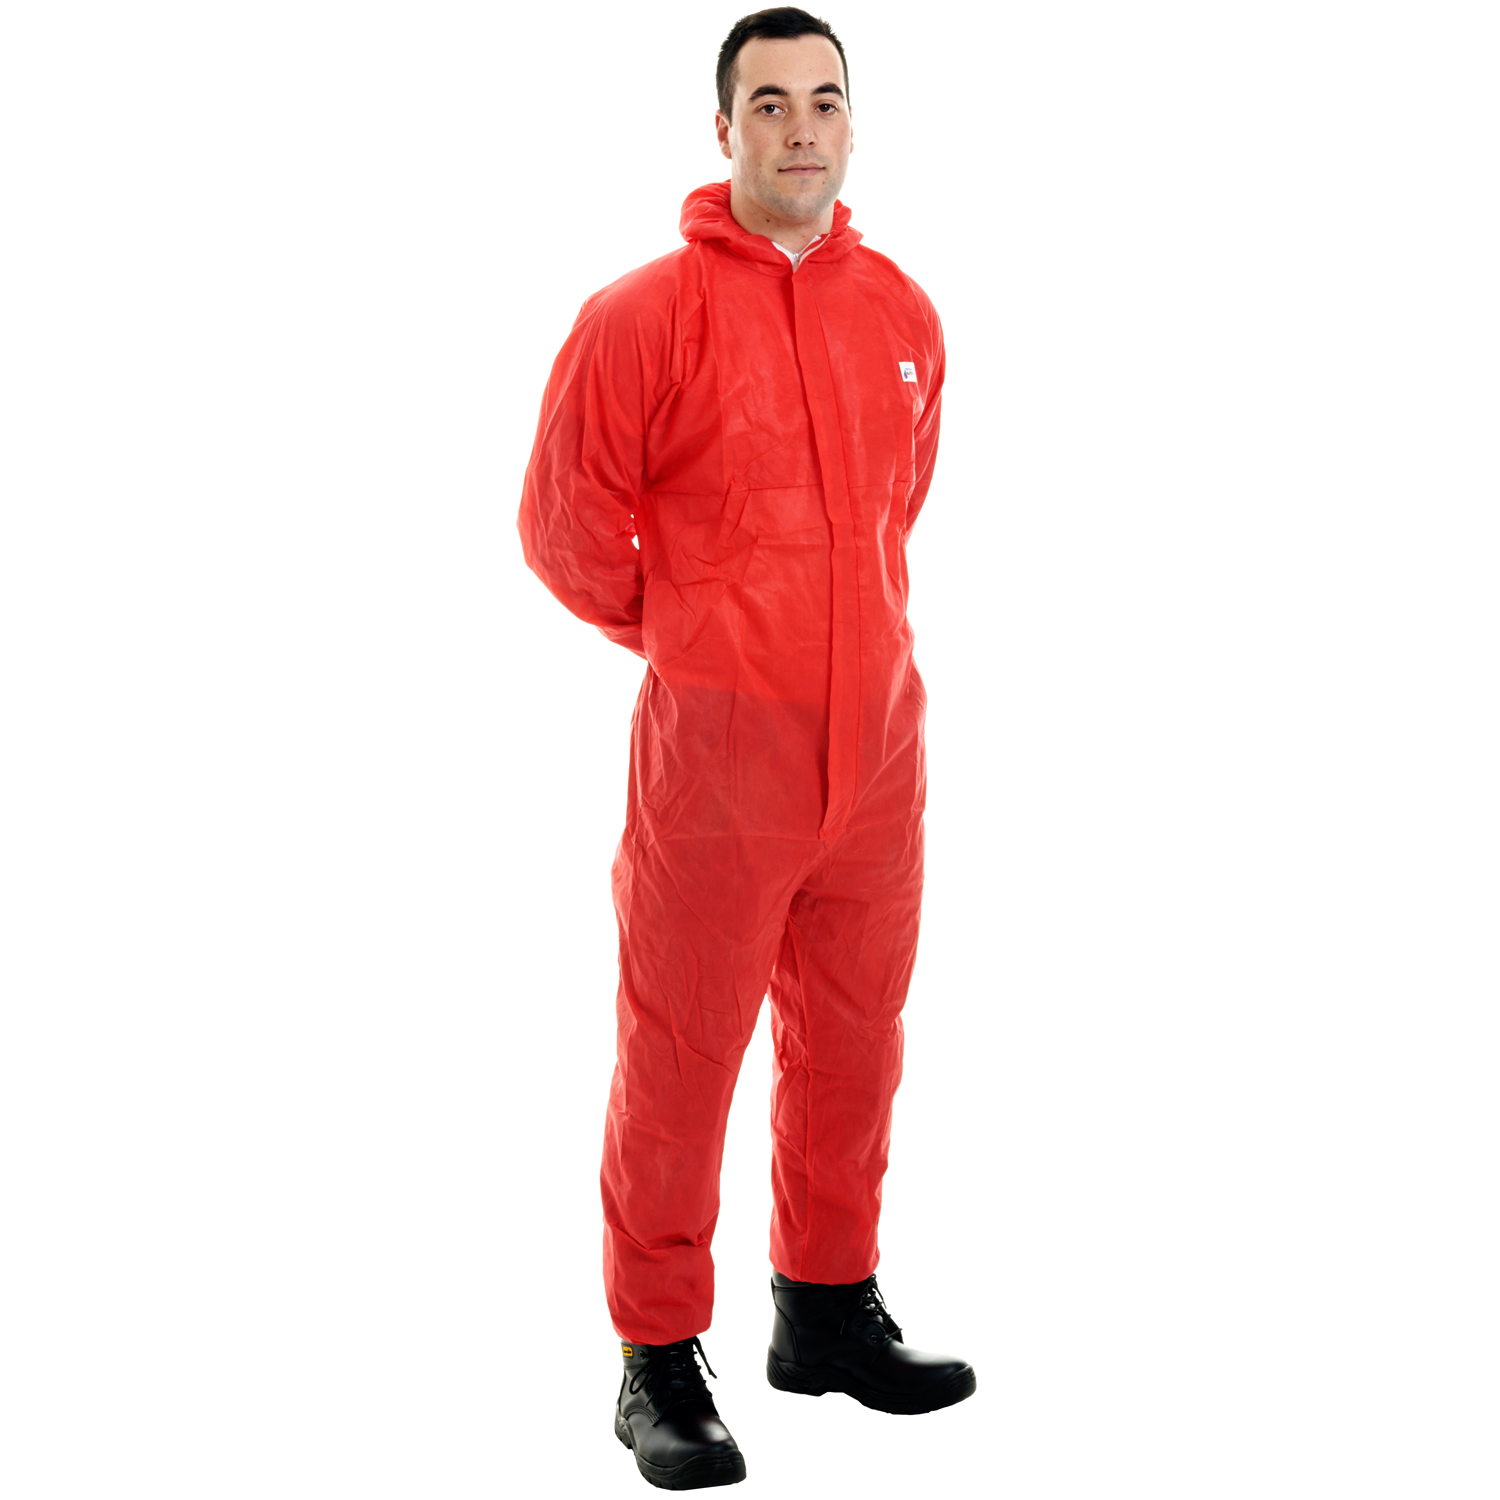 Supertex SMS Disposable Coverall Red - Small